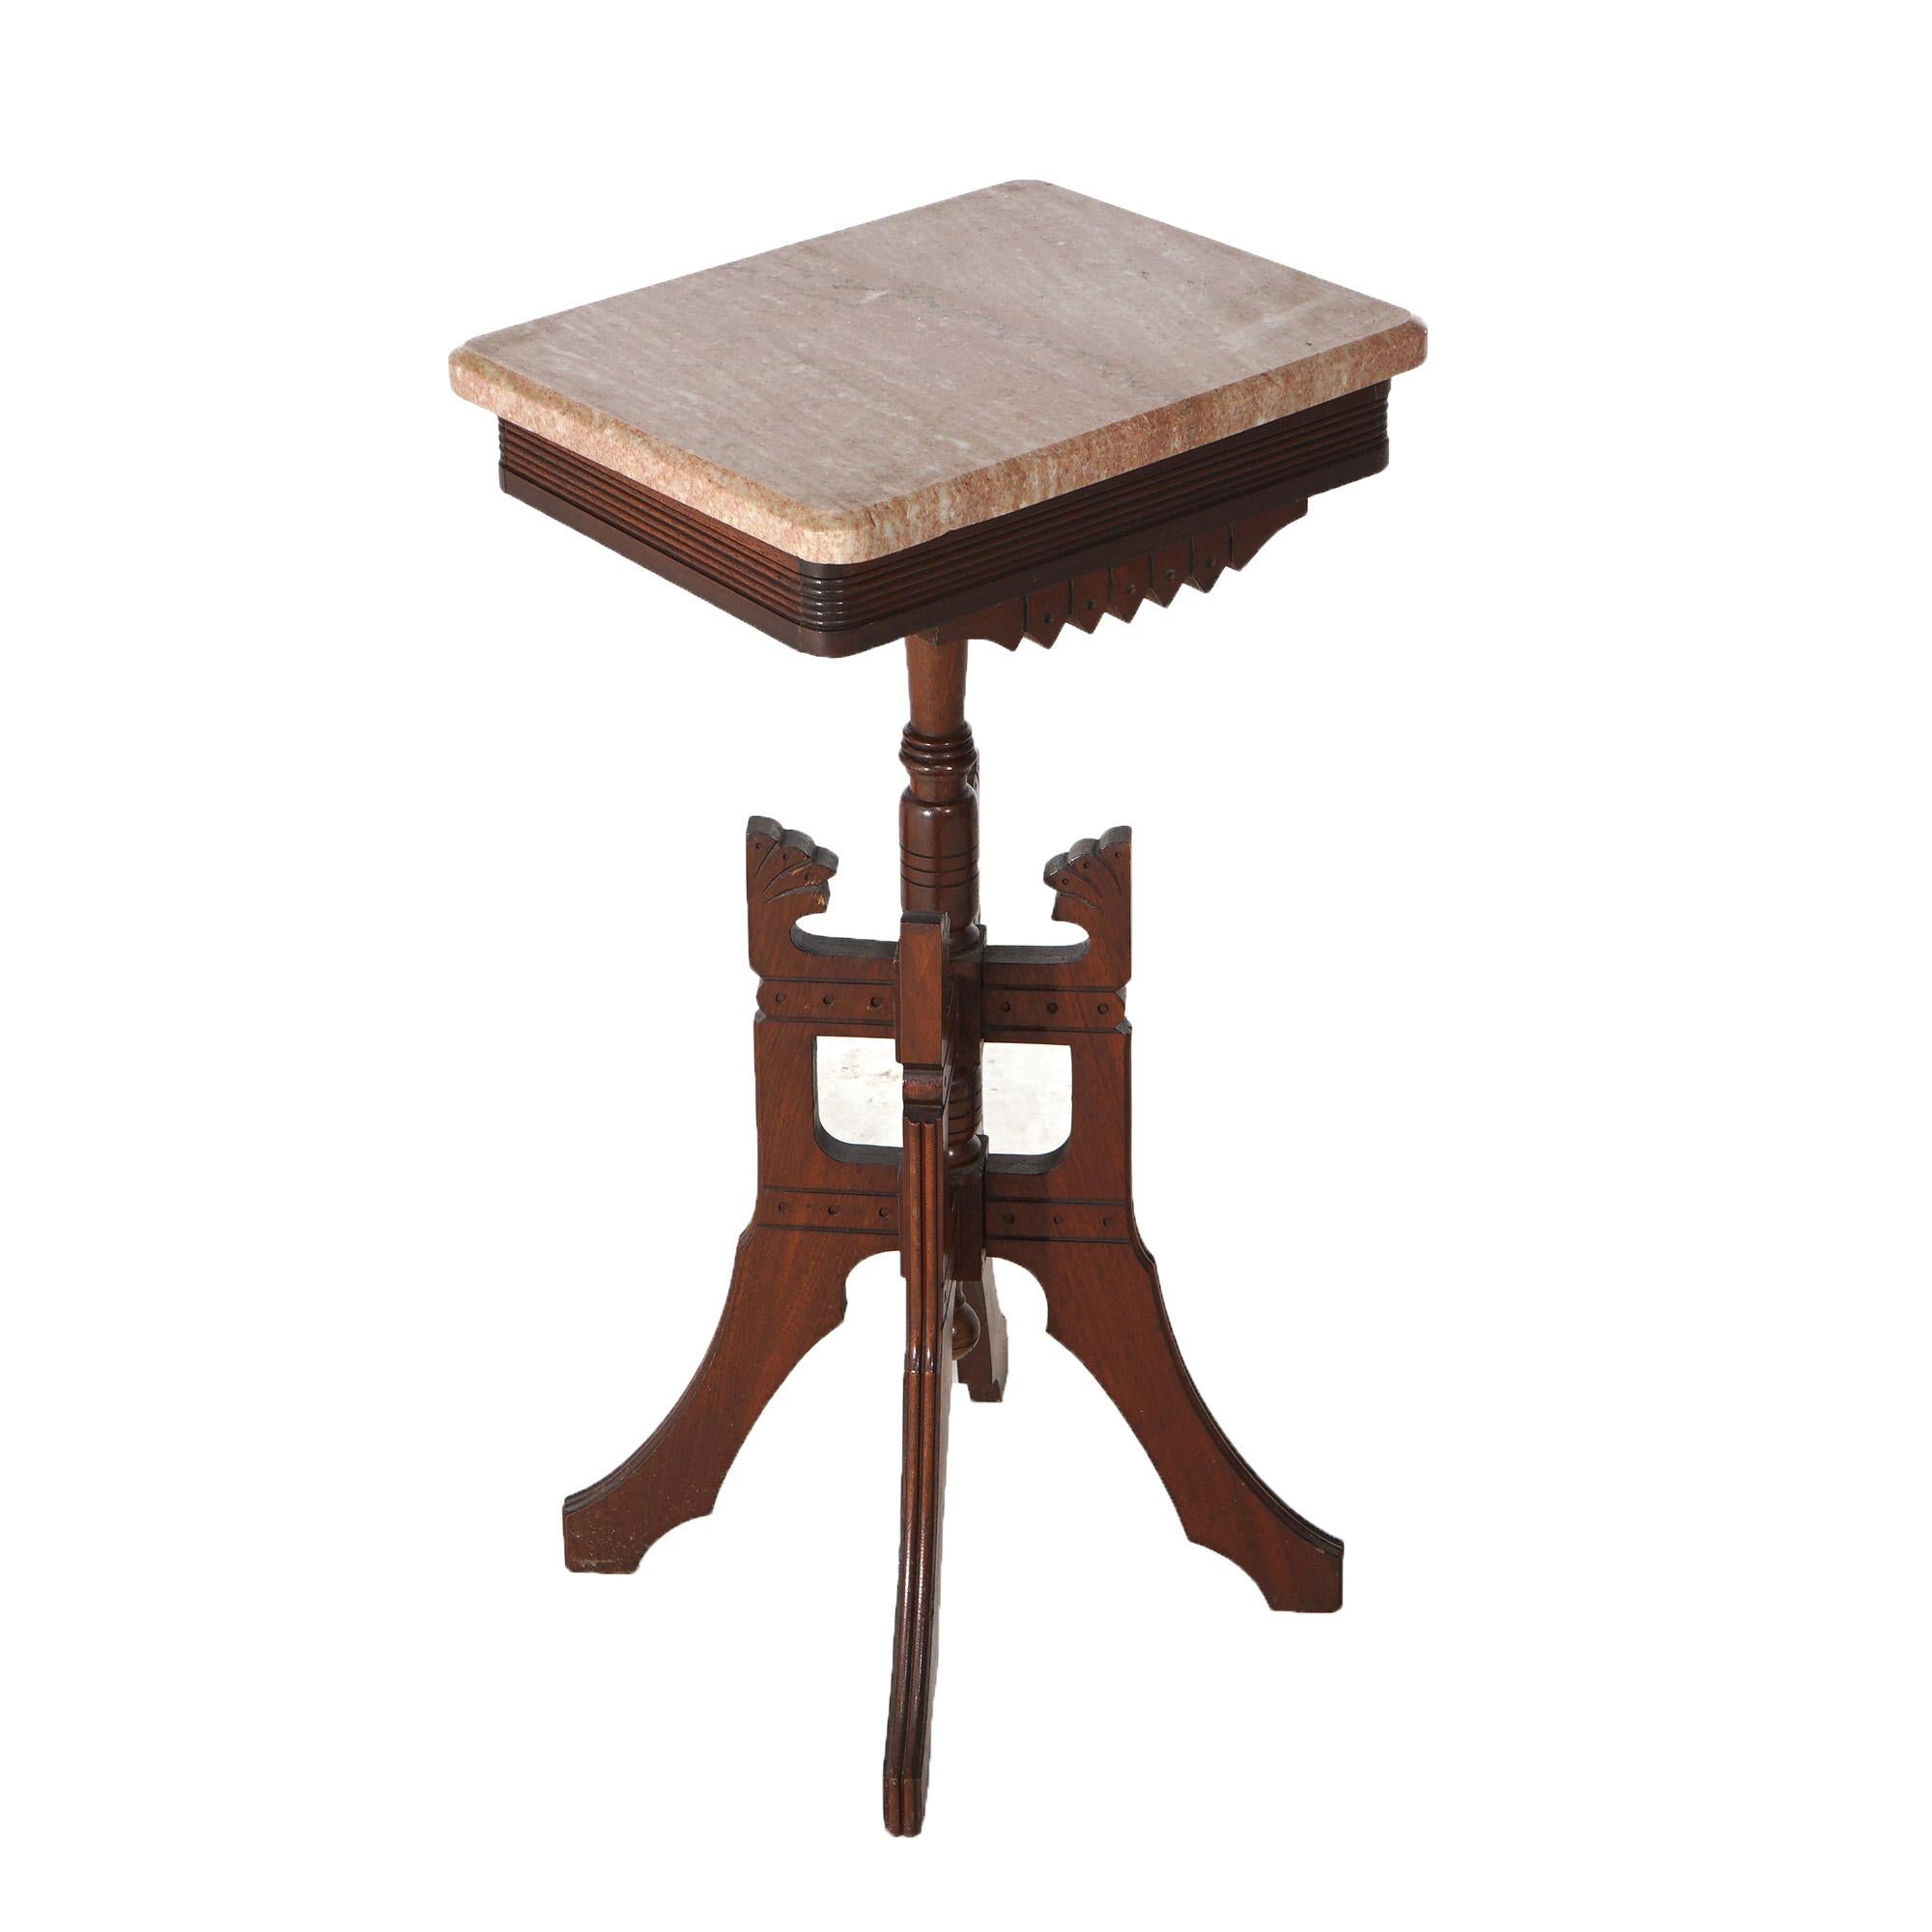 An antique Eastlake side stand offers marble top over incised decorated walnut base having shaped skirt and raised on stylized legs, c1890

Measures- 29.75''H x 15.25''W x 12''D